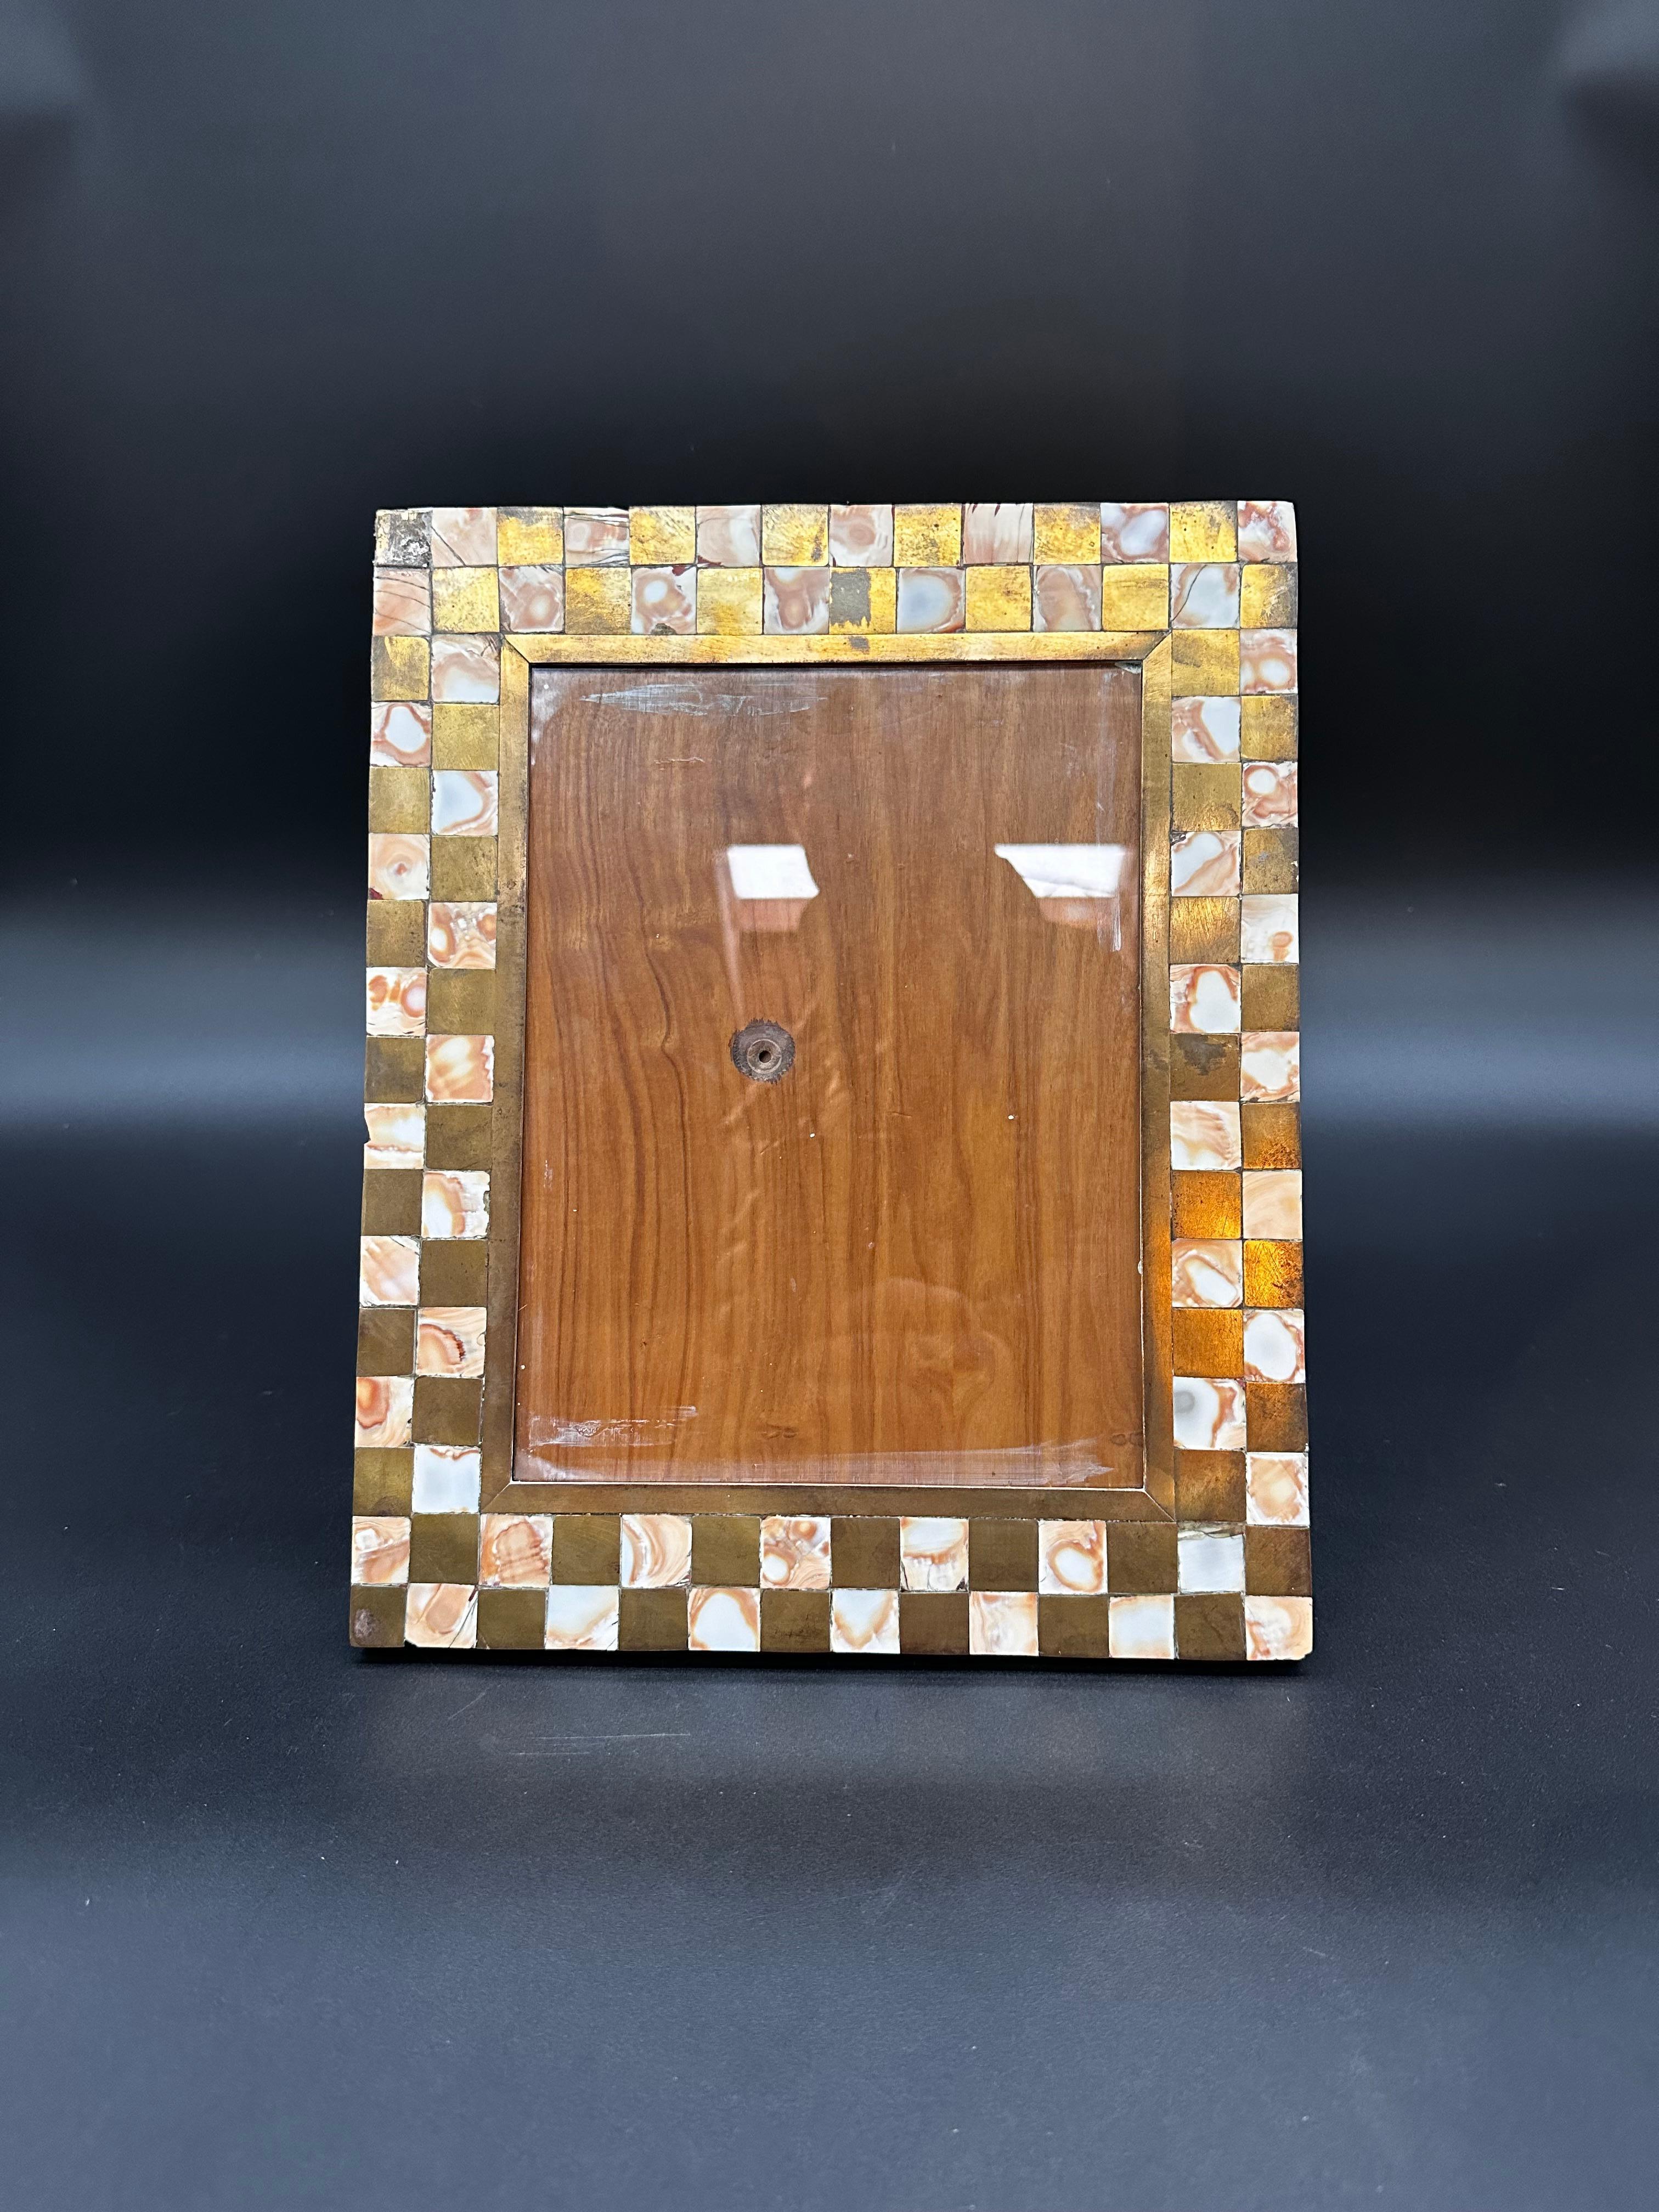 The Vintage Italian Rectangular Picture Frame from the 1970s is a classic piece of Italian craftsmanship. Featuring clean lines and understated elegance, this frame is crafted from high-quality materials, likely wood or metal, with a sophisticated